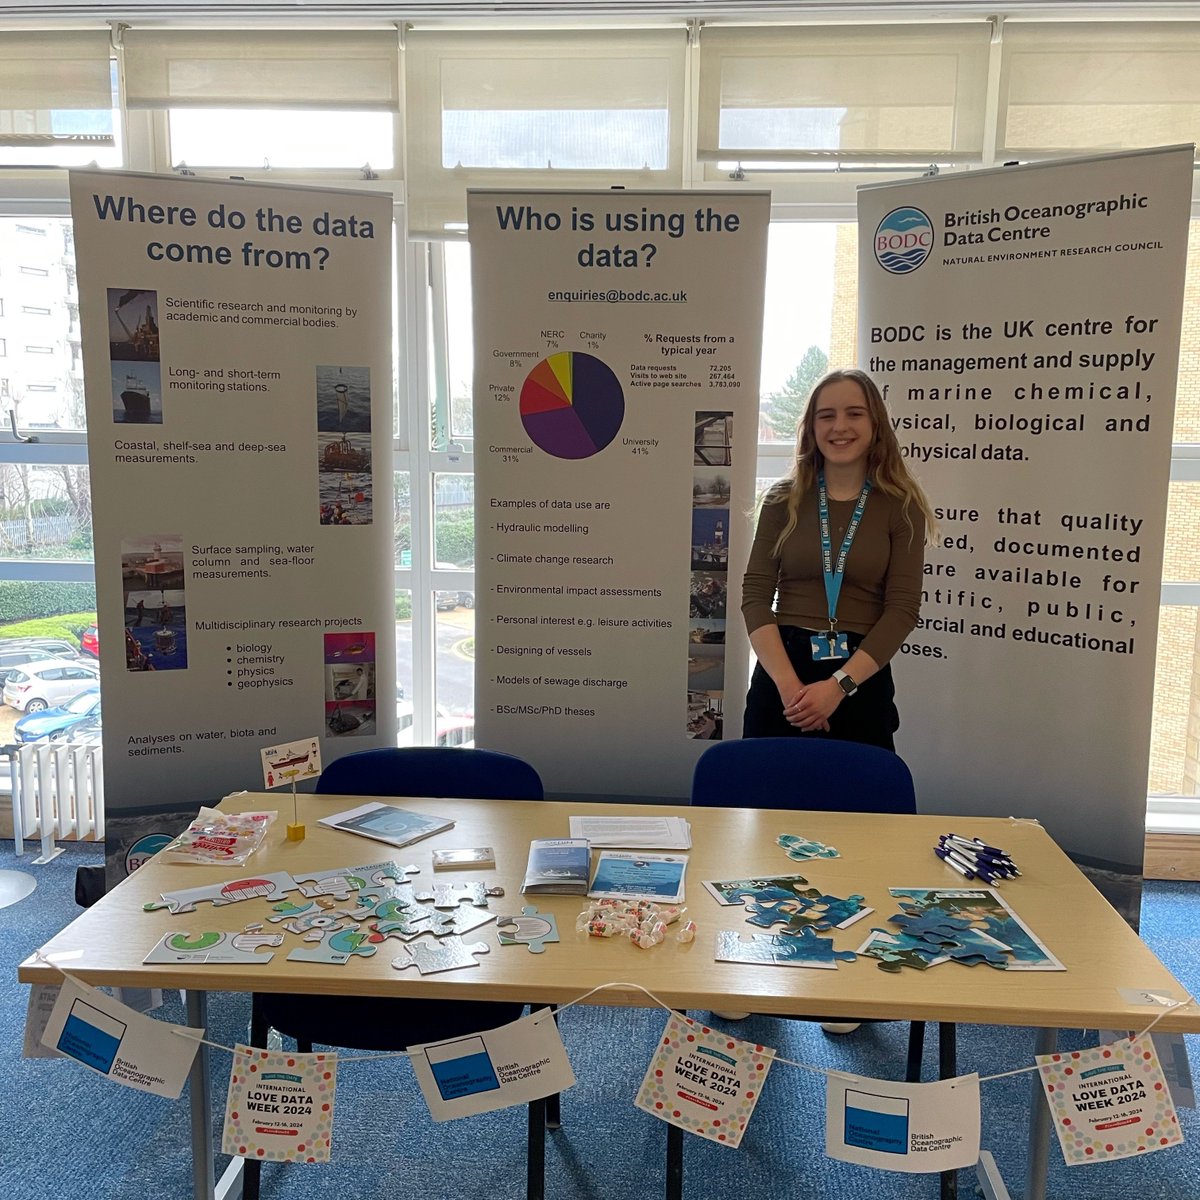 Yesterday we attended the @OceanEarthUoS Annual careers day at the NOC (@NOCnews) We discussed the role of a Marine Data Managers at BODC, the types of data we archive, and the importance of good data management practices! See noc.ac.uk/careers for future vacancies 📊🌊